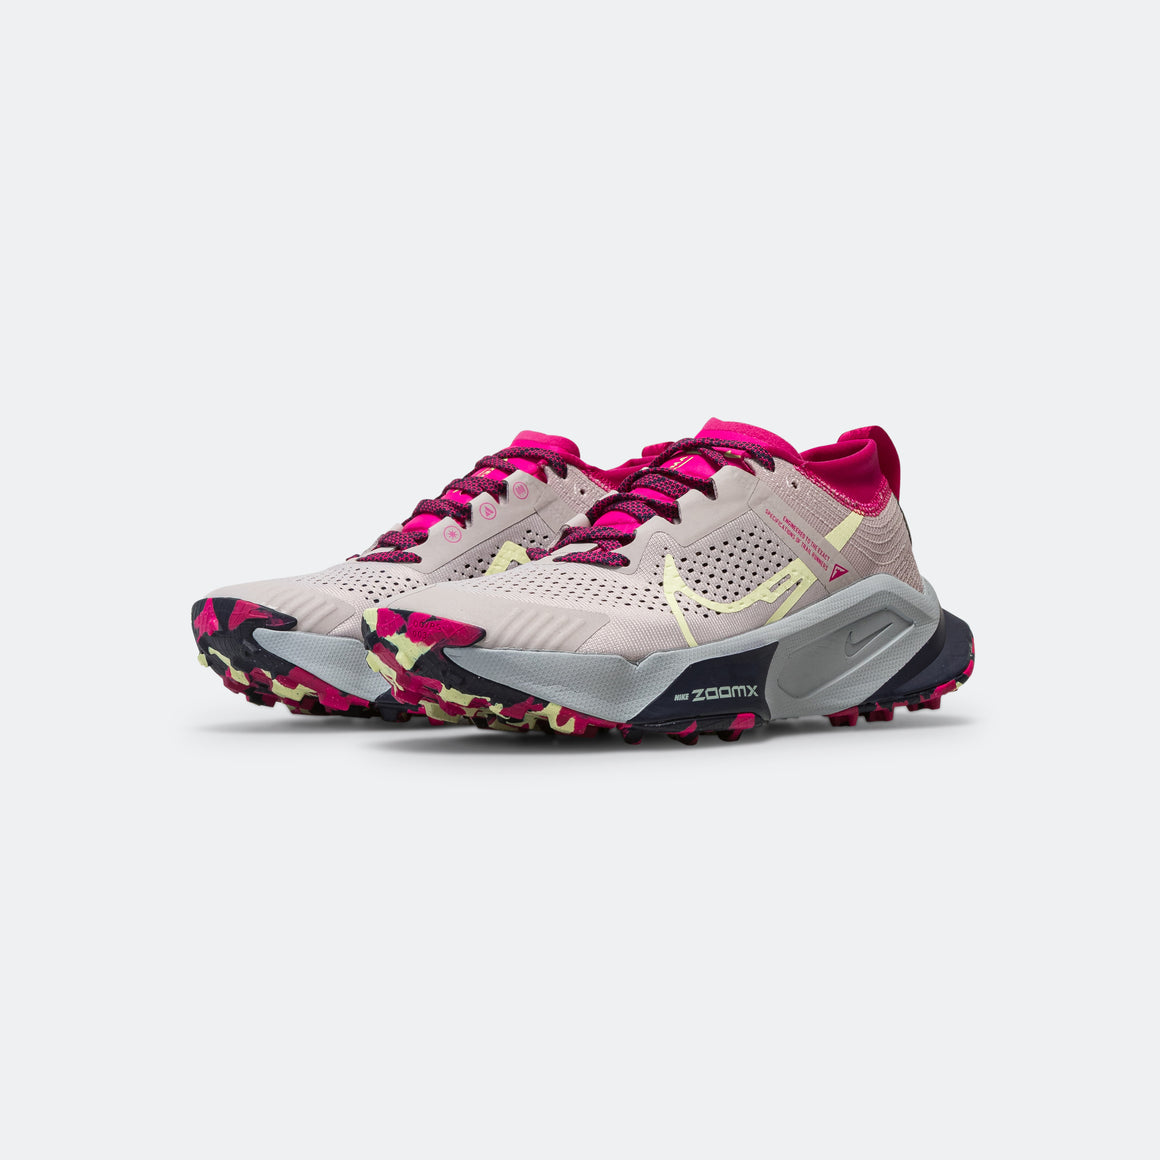 Nike - Womens ZoomX Zegama Trail - Platinum Violet/Luminous Green - Up There Athletics